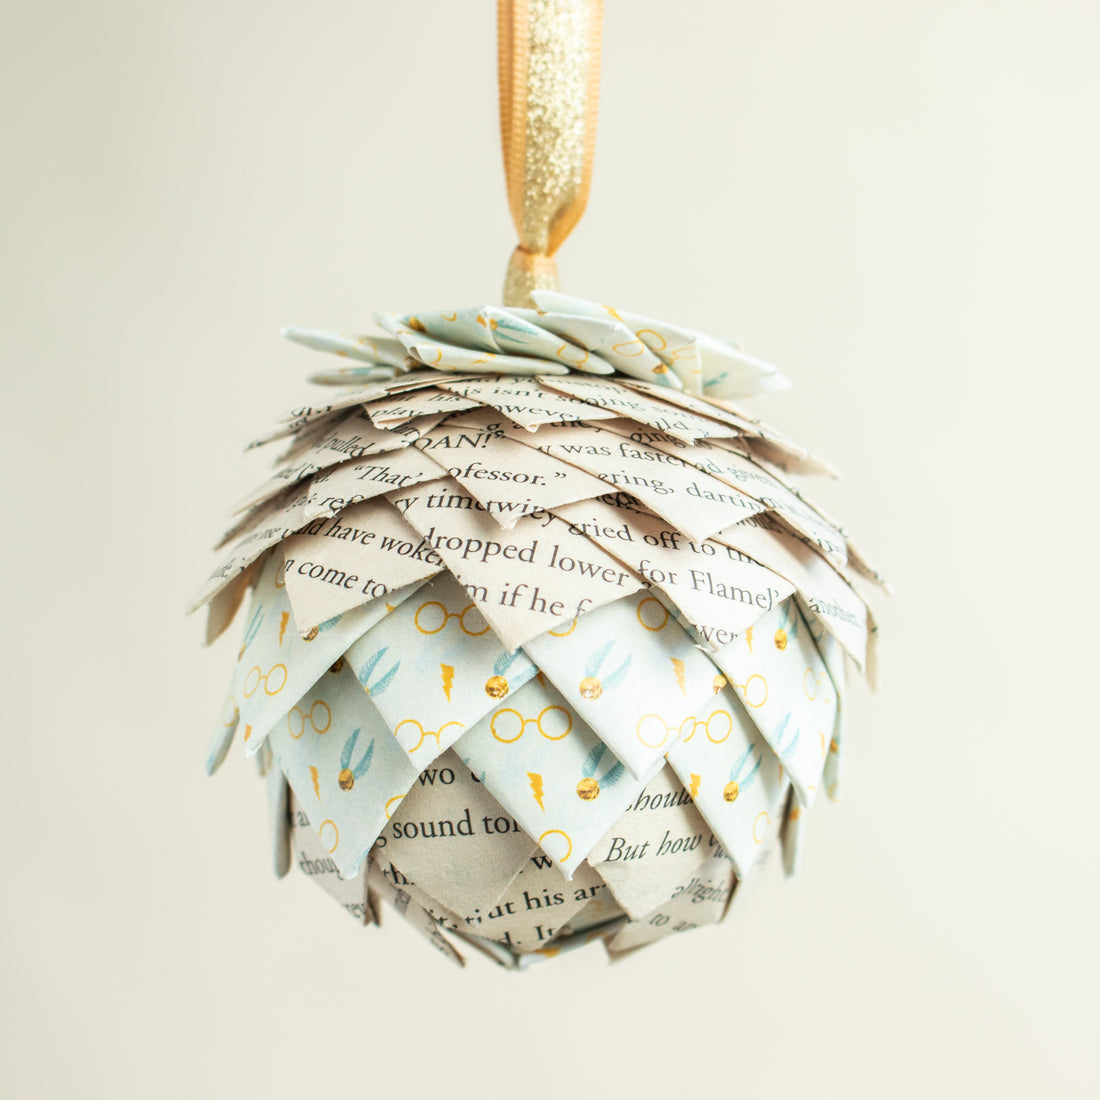 Harry Potter White Golden Snitch Book Page Ornament